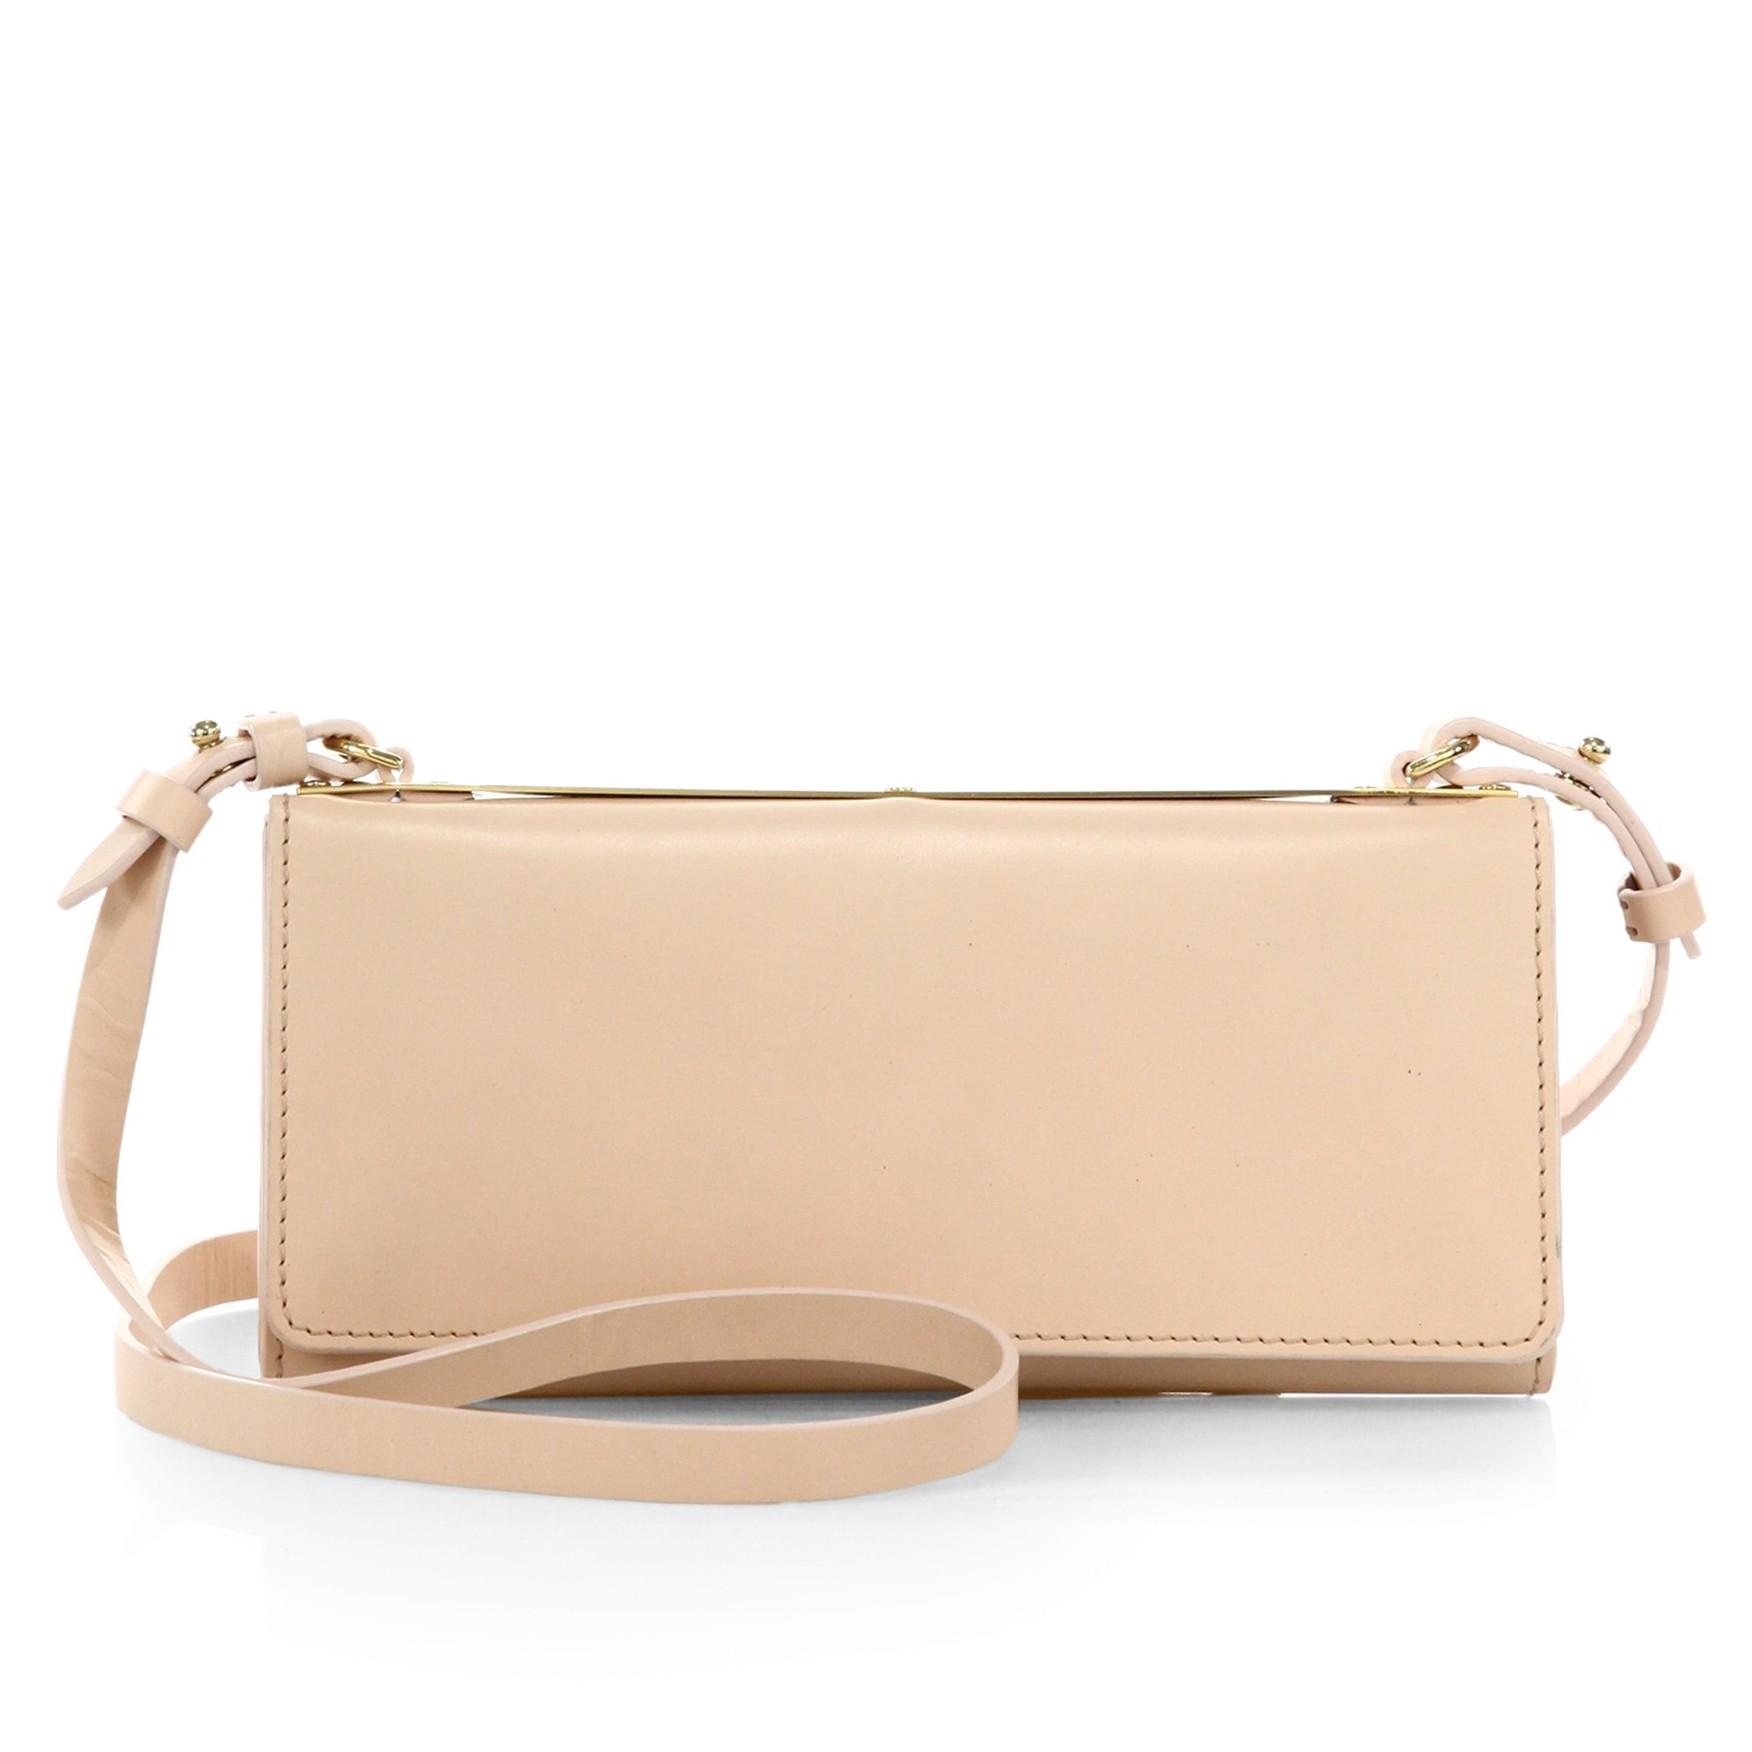 Sophie Hulme Spine Leather Travel Crossbody Bag In Blossom Pink | ModeSens